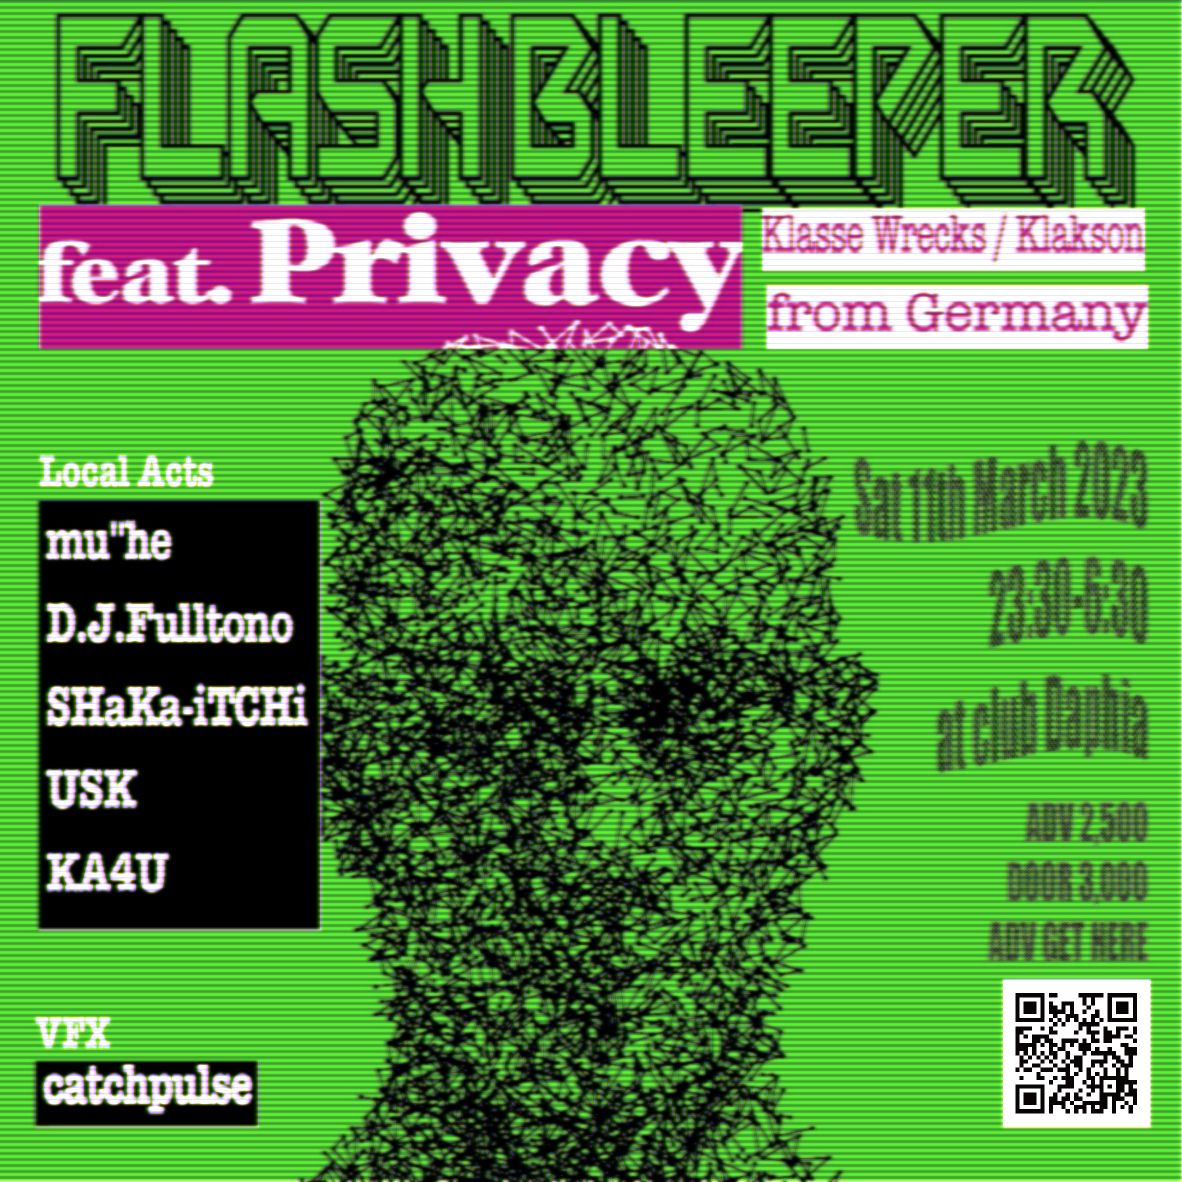 FLASH BLEEPER feat. Privacy